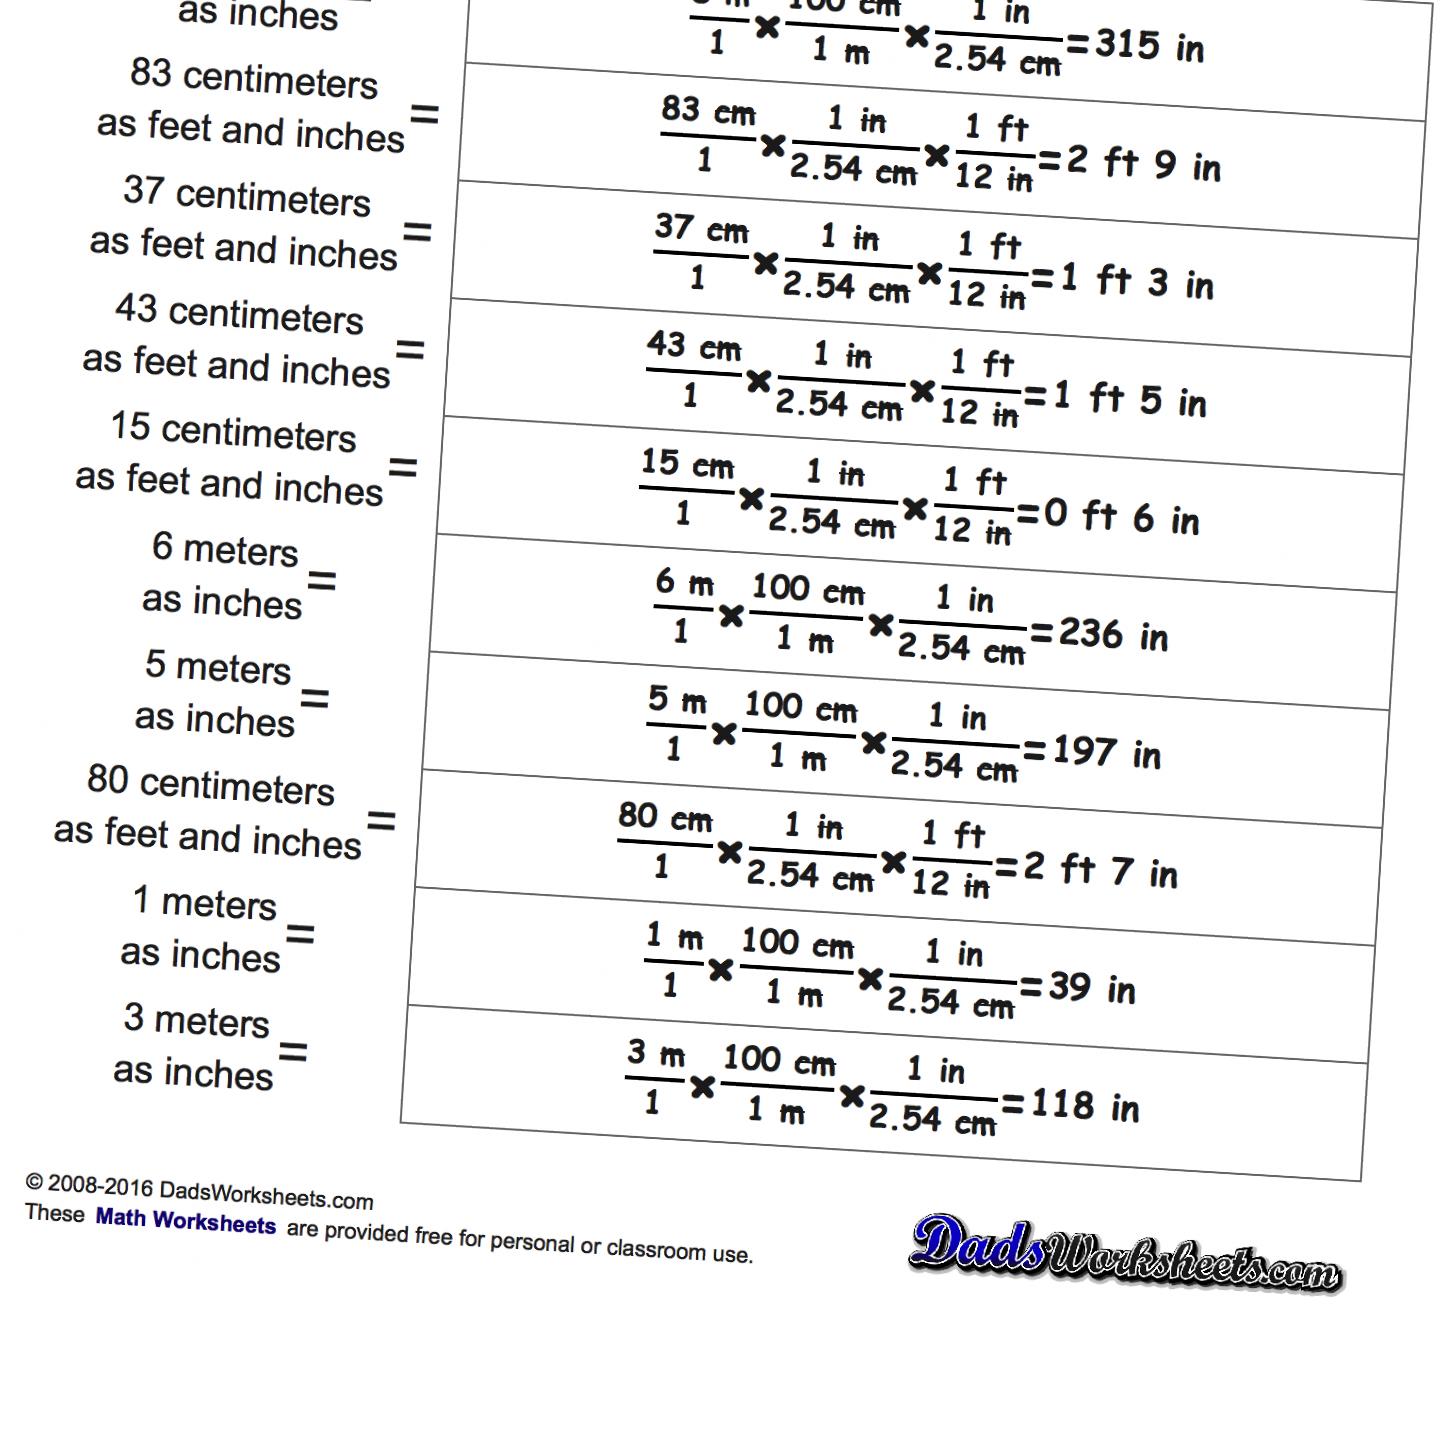 math-worksheets-conversions-between-customary-and-metric